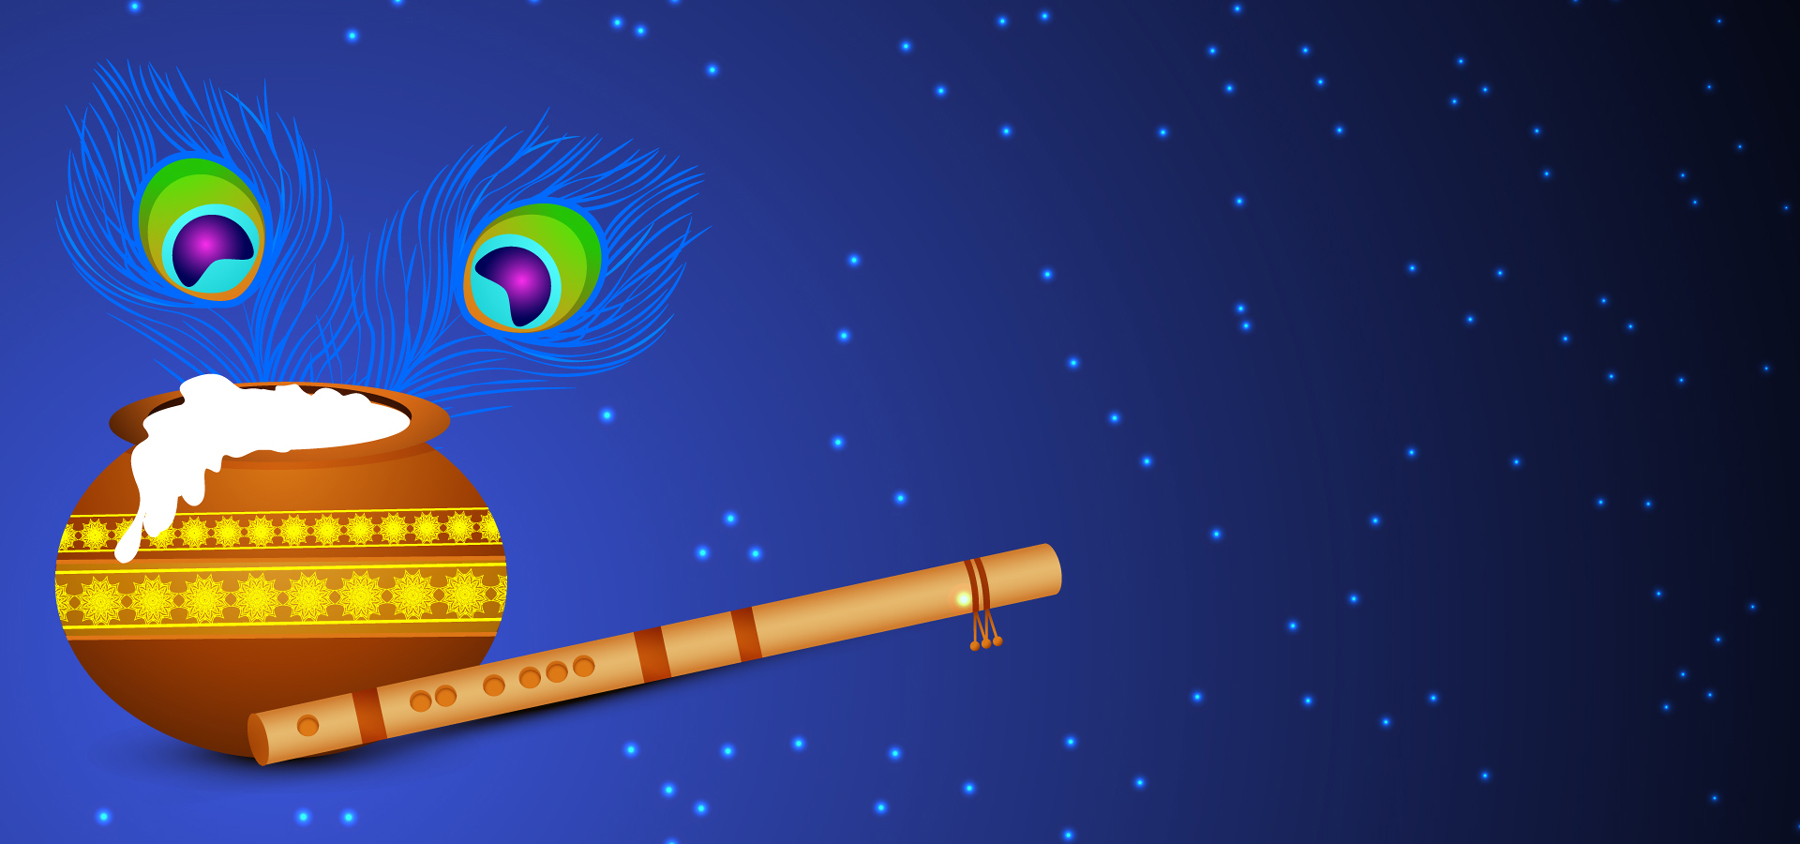 Janmashtami Background HD - FREE Vector Design - Cdr, Ai, EPS, PNG ...